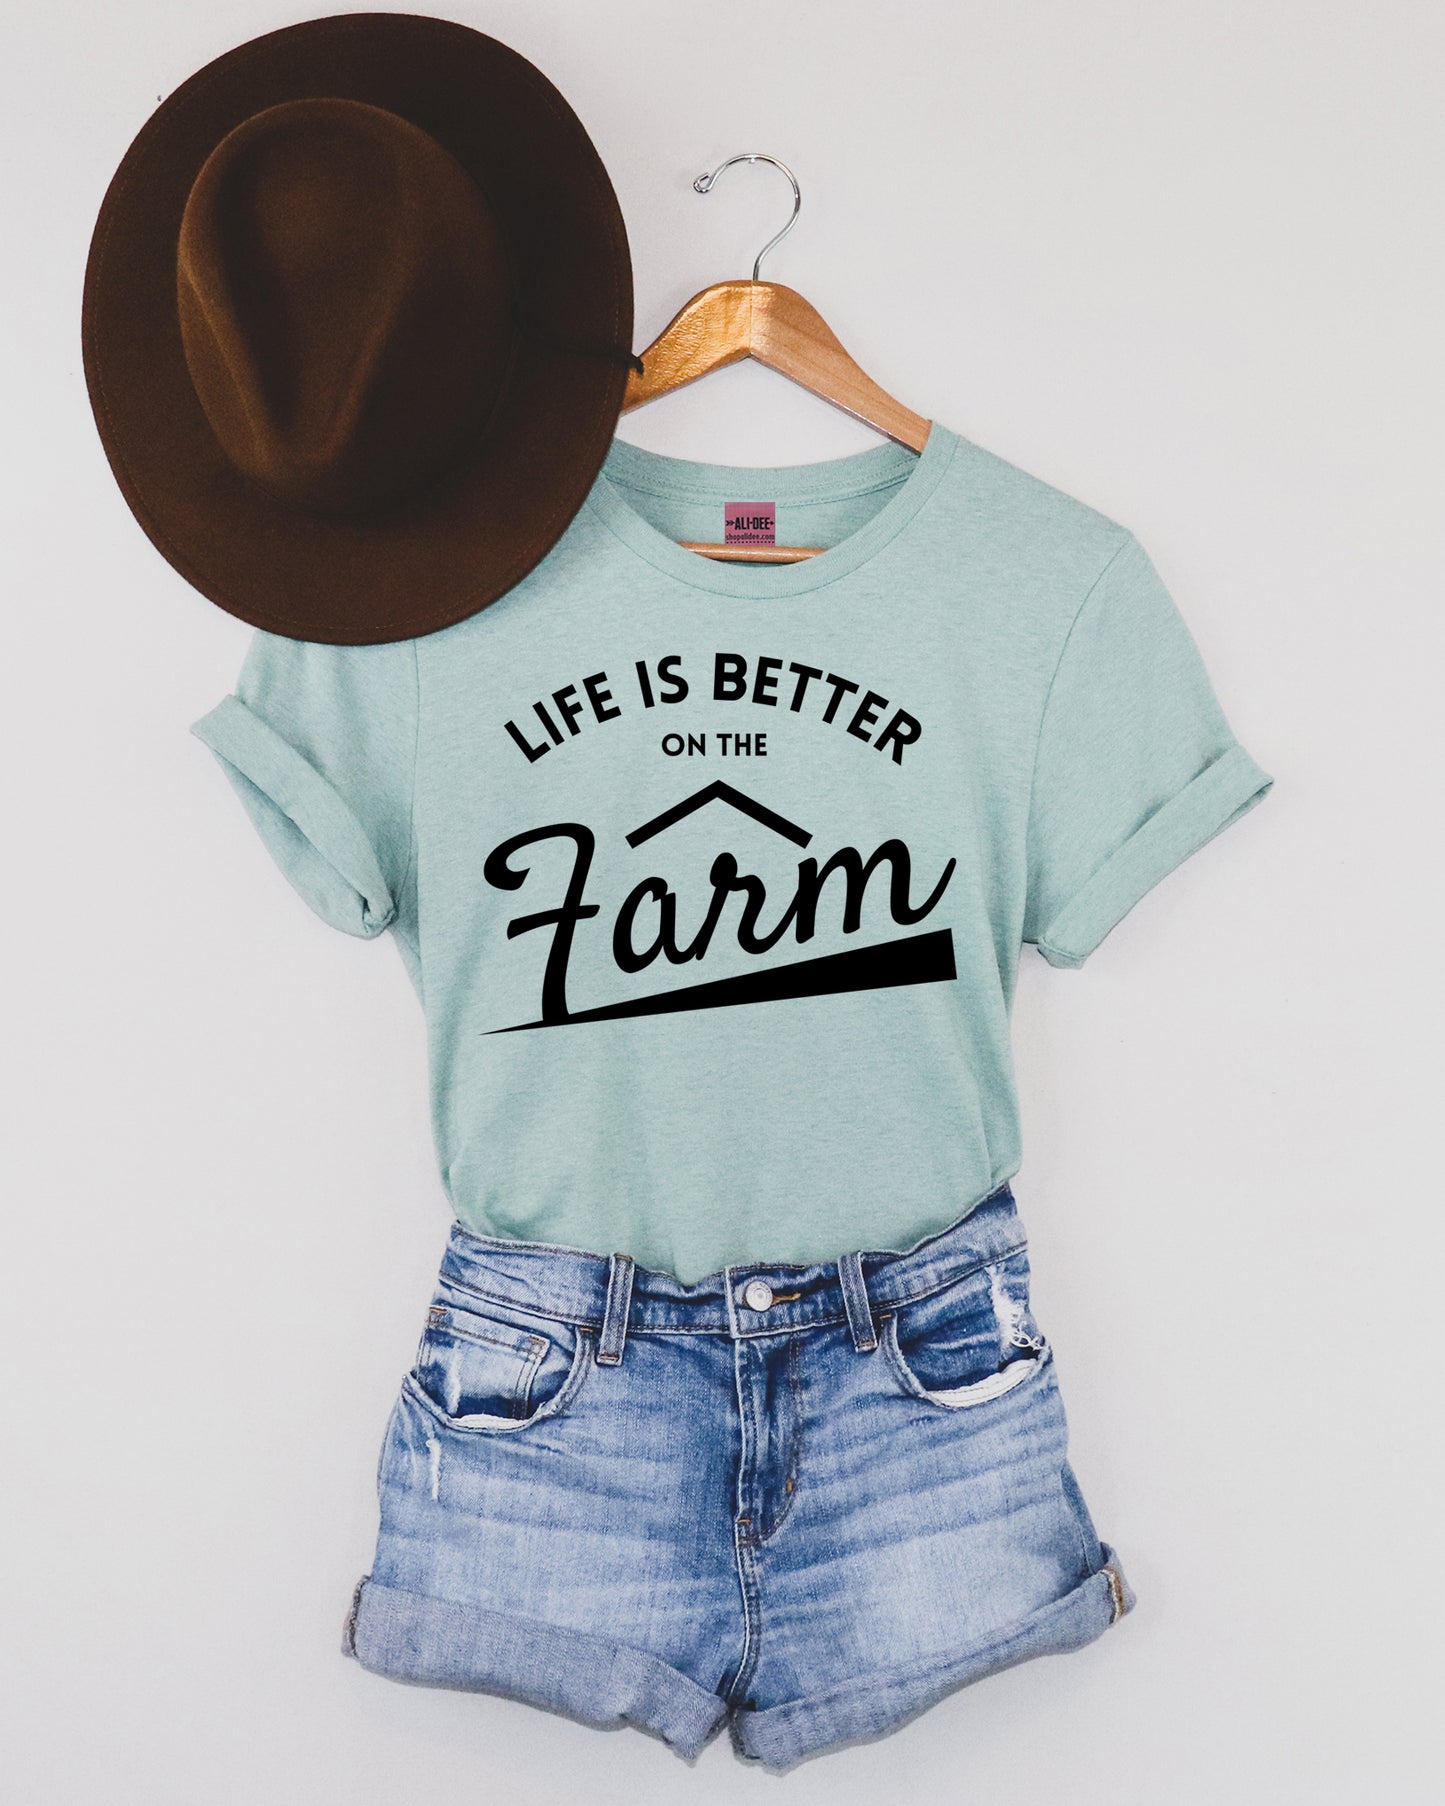 Life is Better on the Farm Tee - Dusty Blue